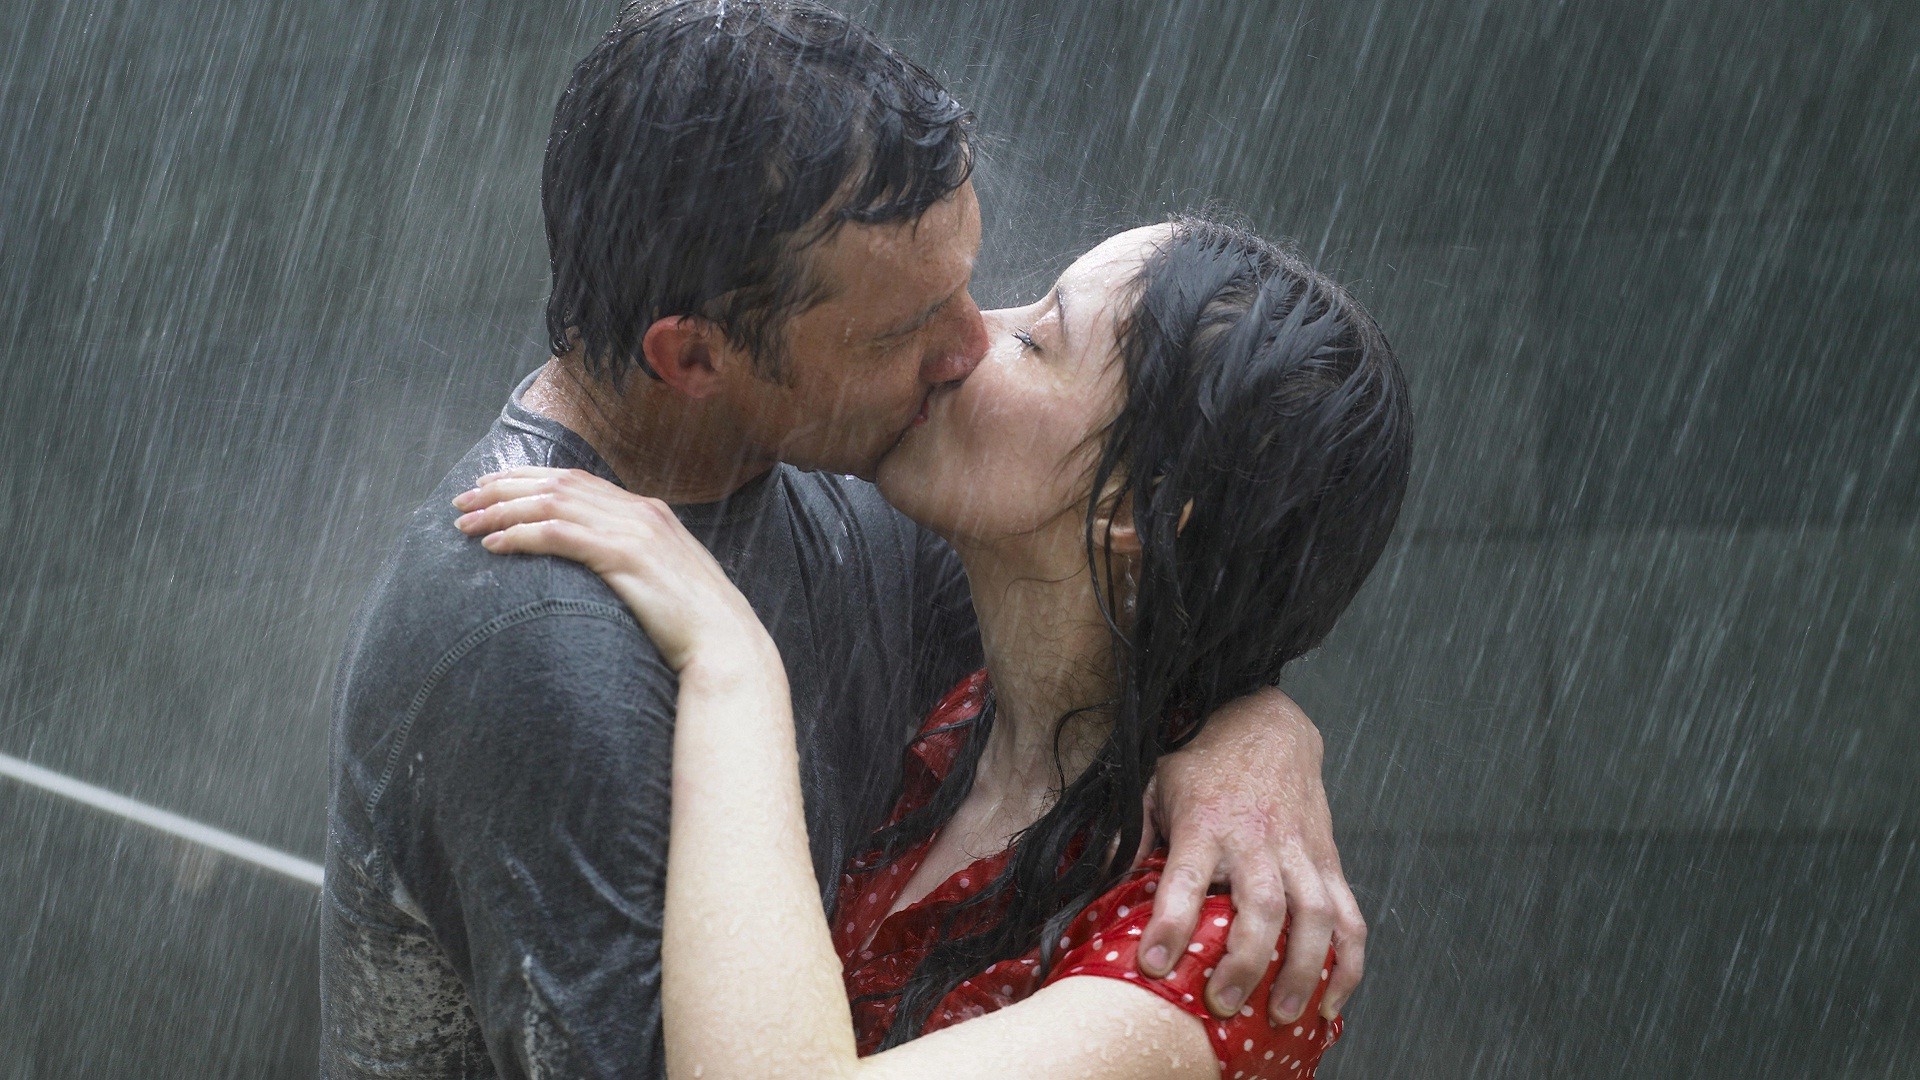 1920x1080 Couple lips kissing and romance in rain wallpapers